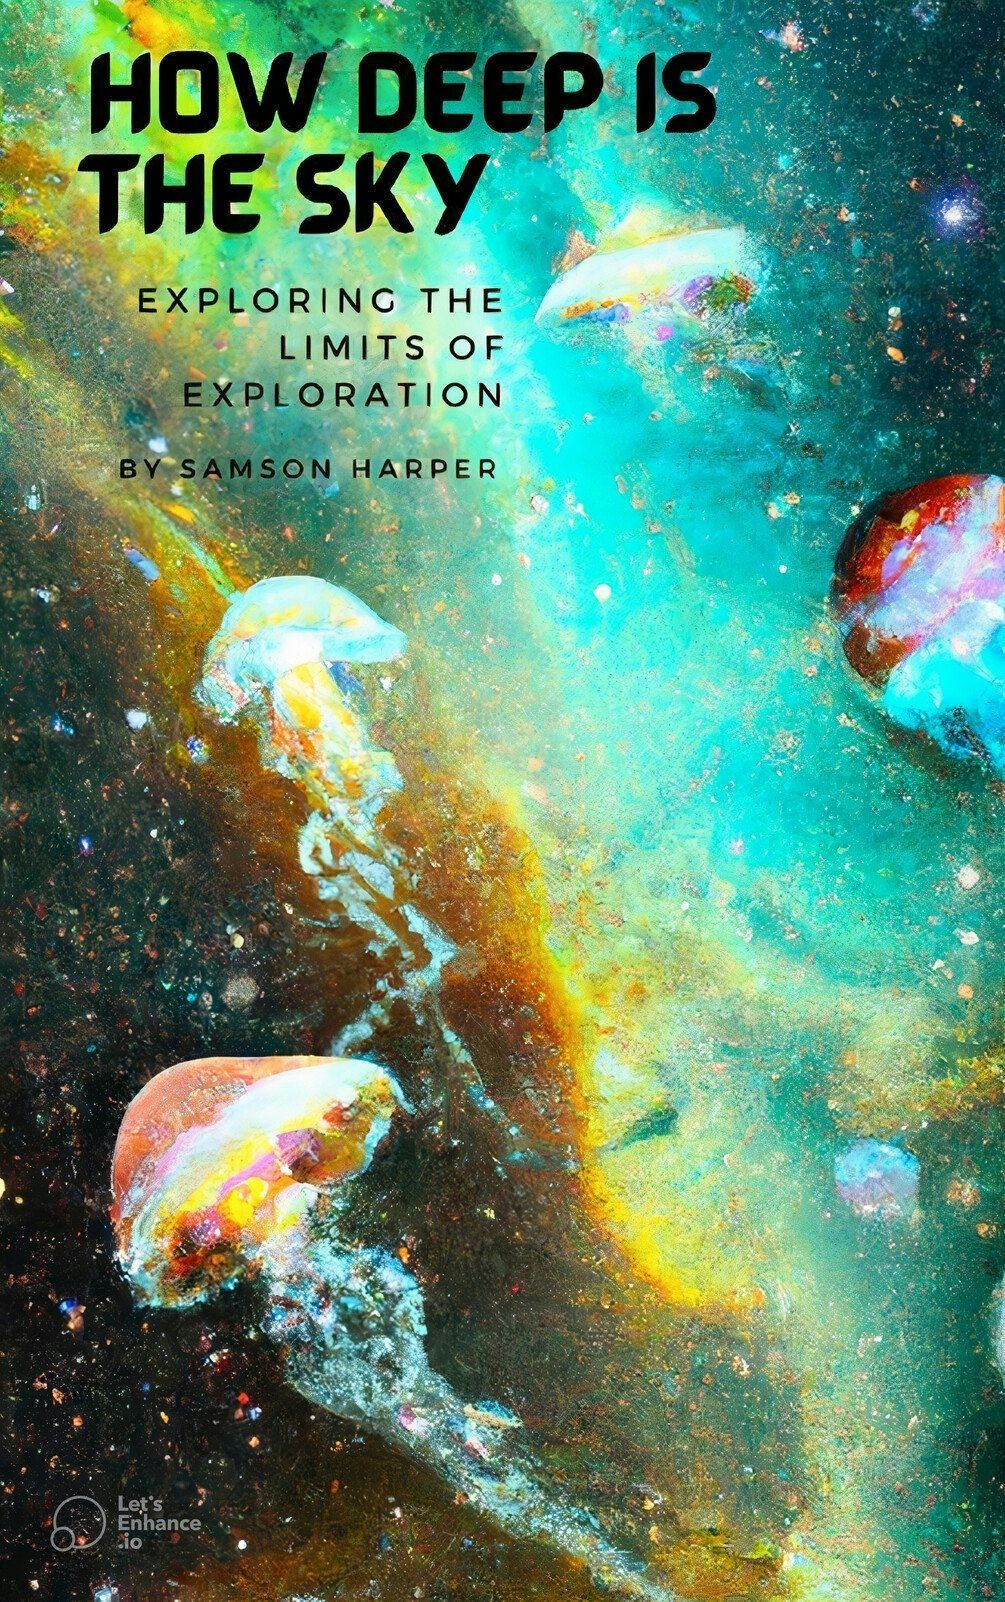 How Deep is the Sky? Exploring the Limits of Exploration by Samson Harper